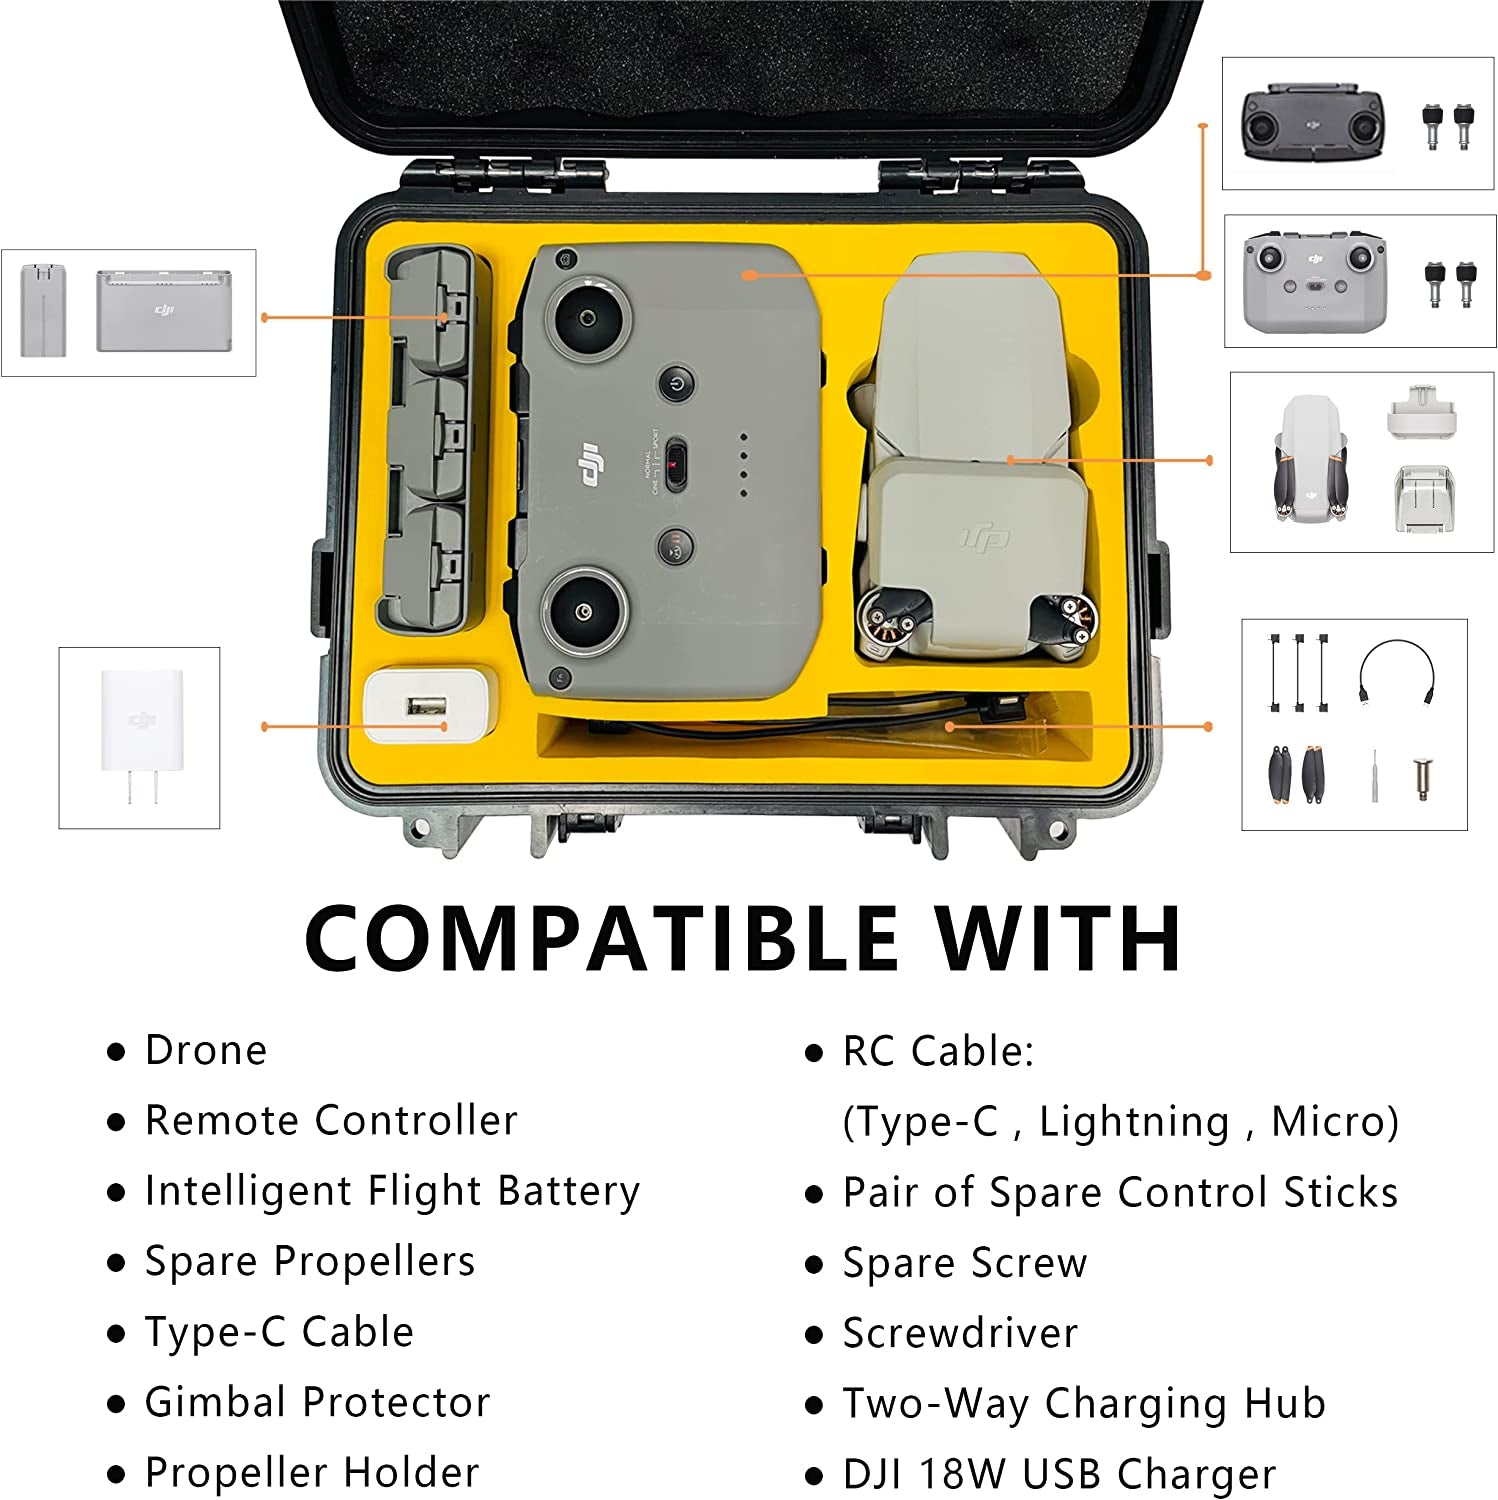 Waterproof Hard Case for DJI Mini 2, Compatible DJI Mini2/Mini / DJI Mini SE, Compact Portable Carrying Case for Mavic Mini 2 Fly More Combo , Professional Drone Accessories (Only Case)